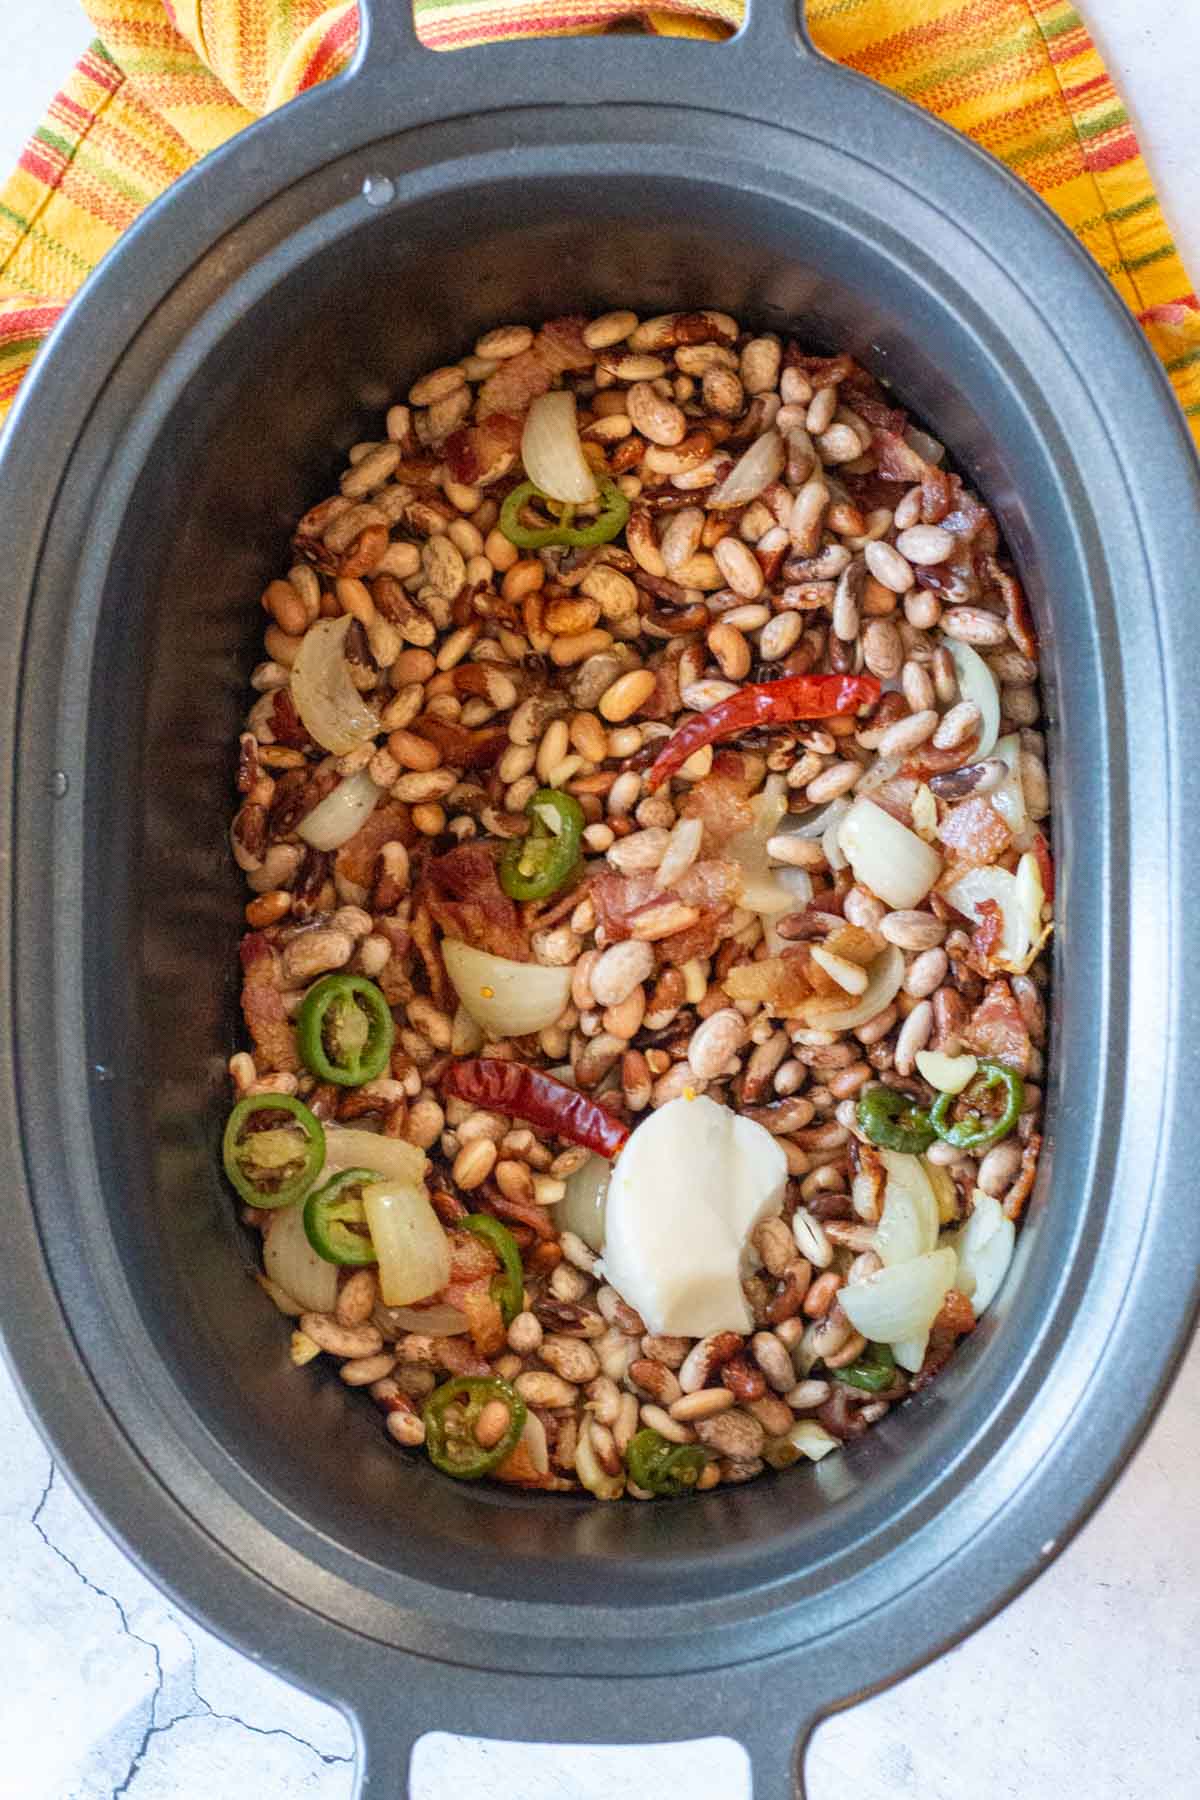 Cooking Cowboy Beans in the Crockpot.